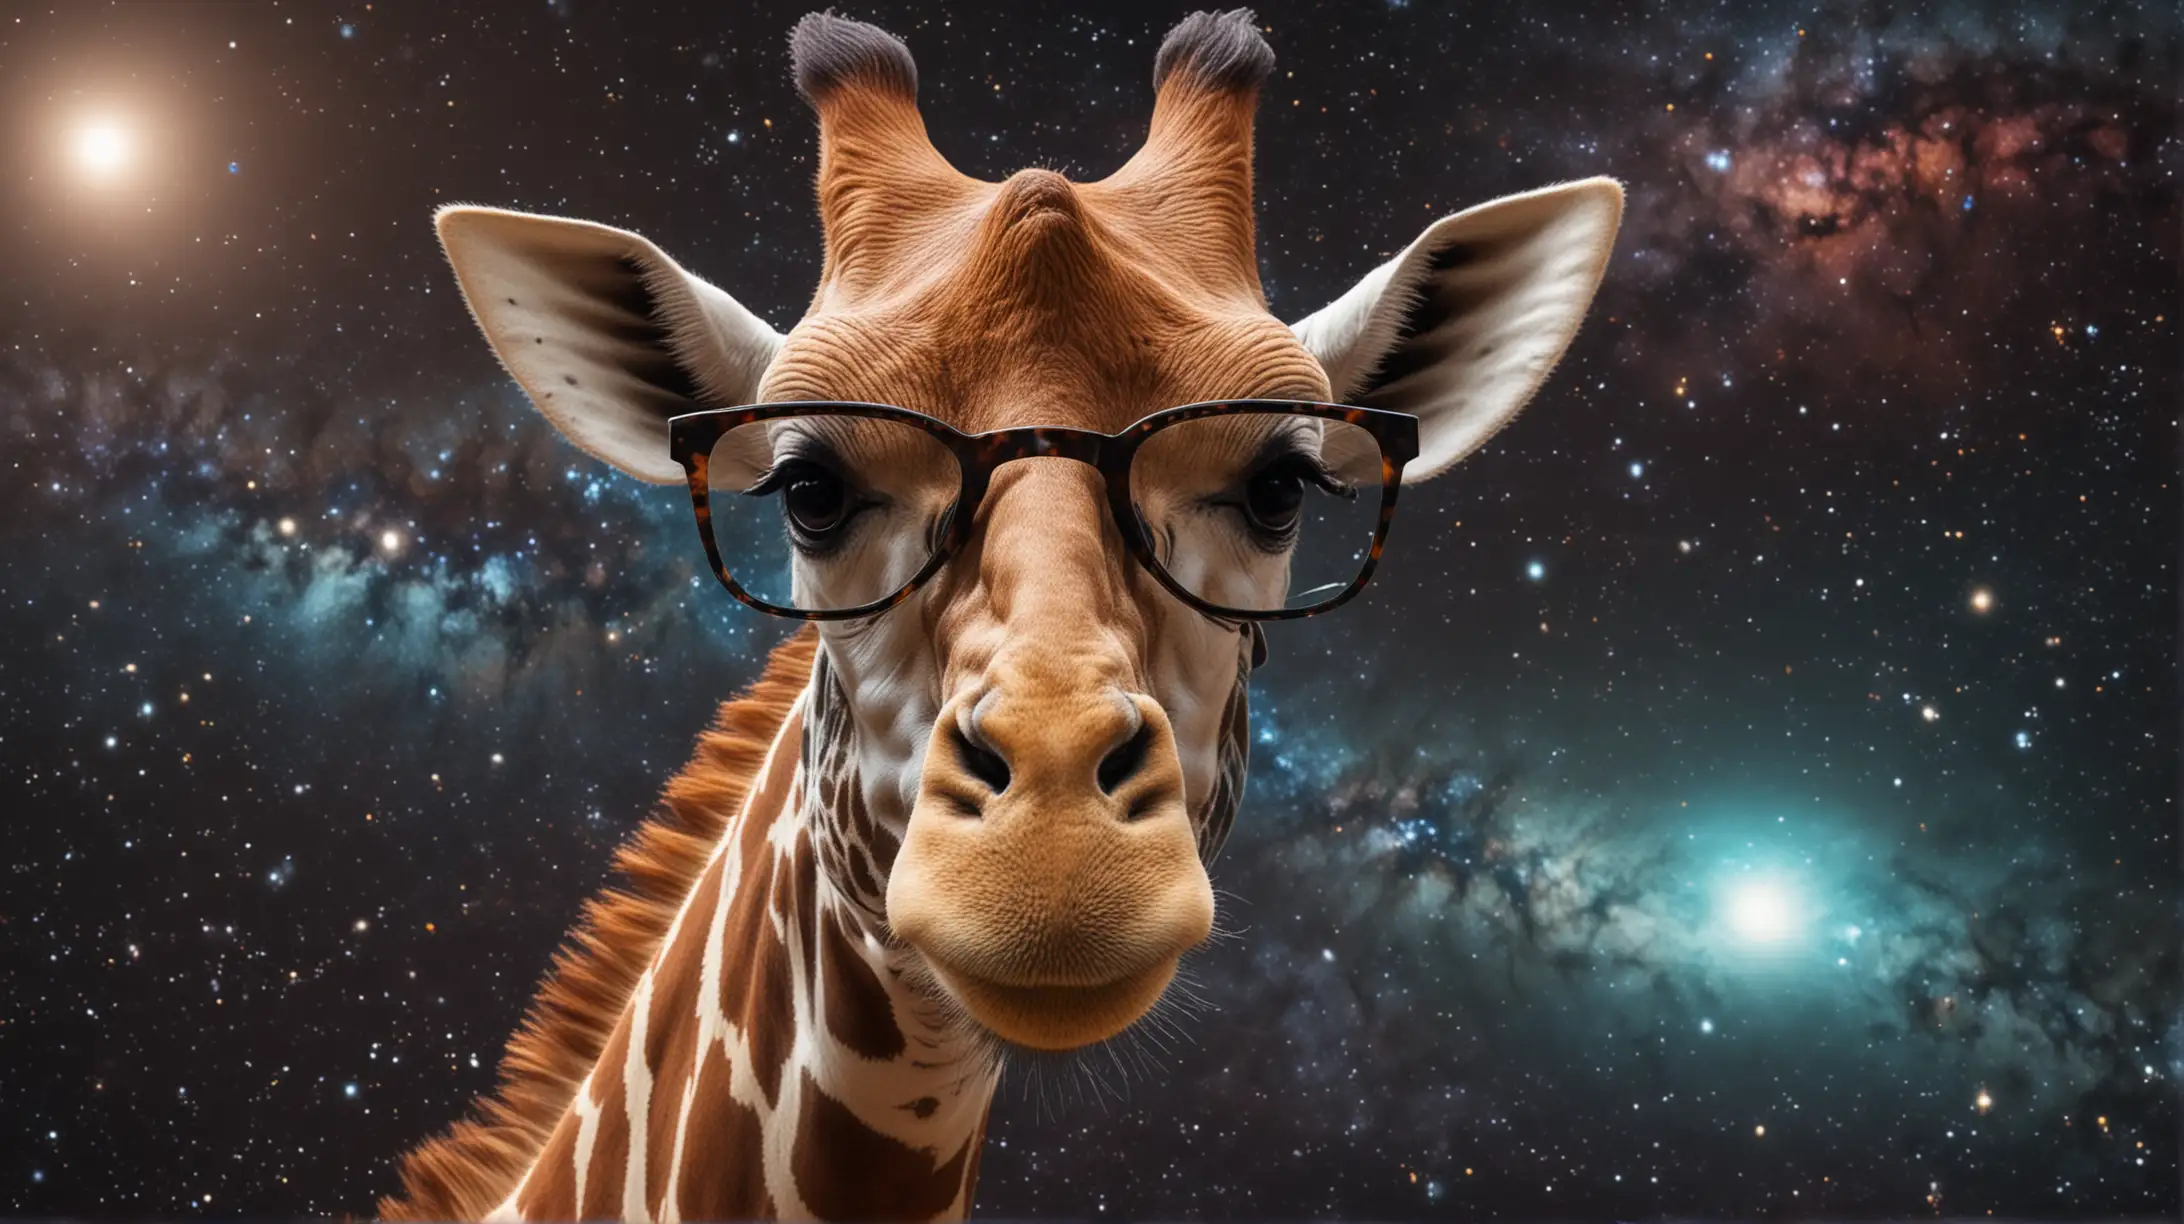 Giraffe with glasses in the space 